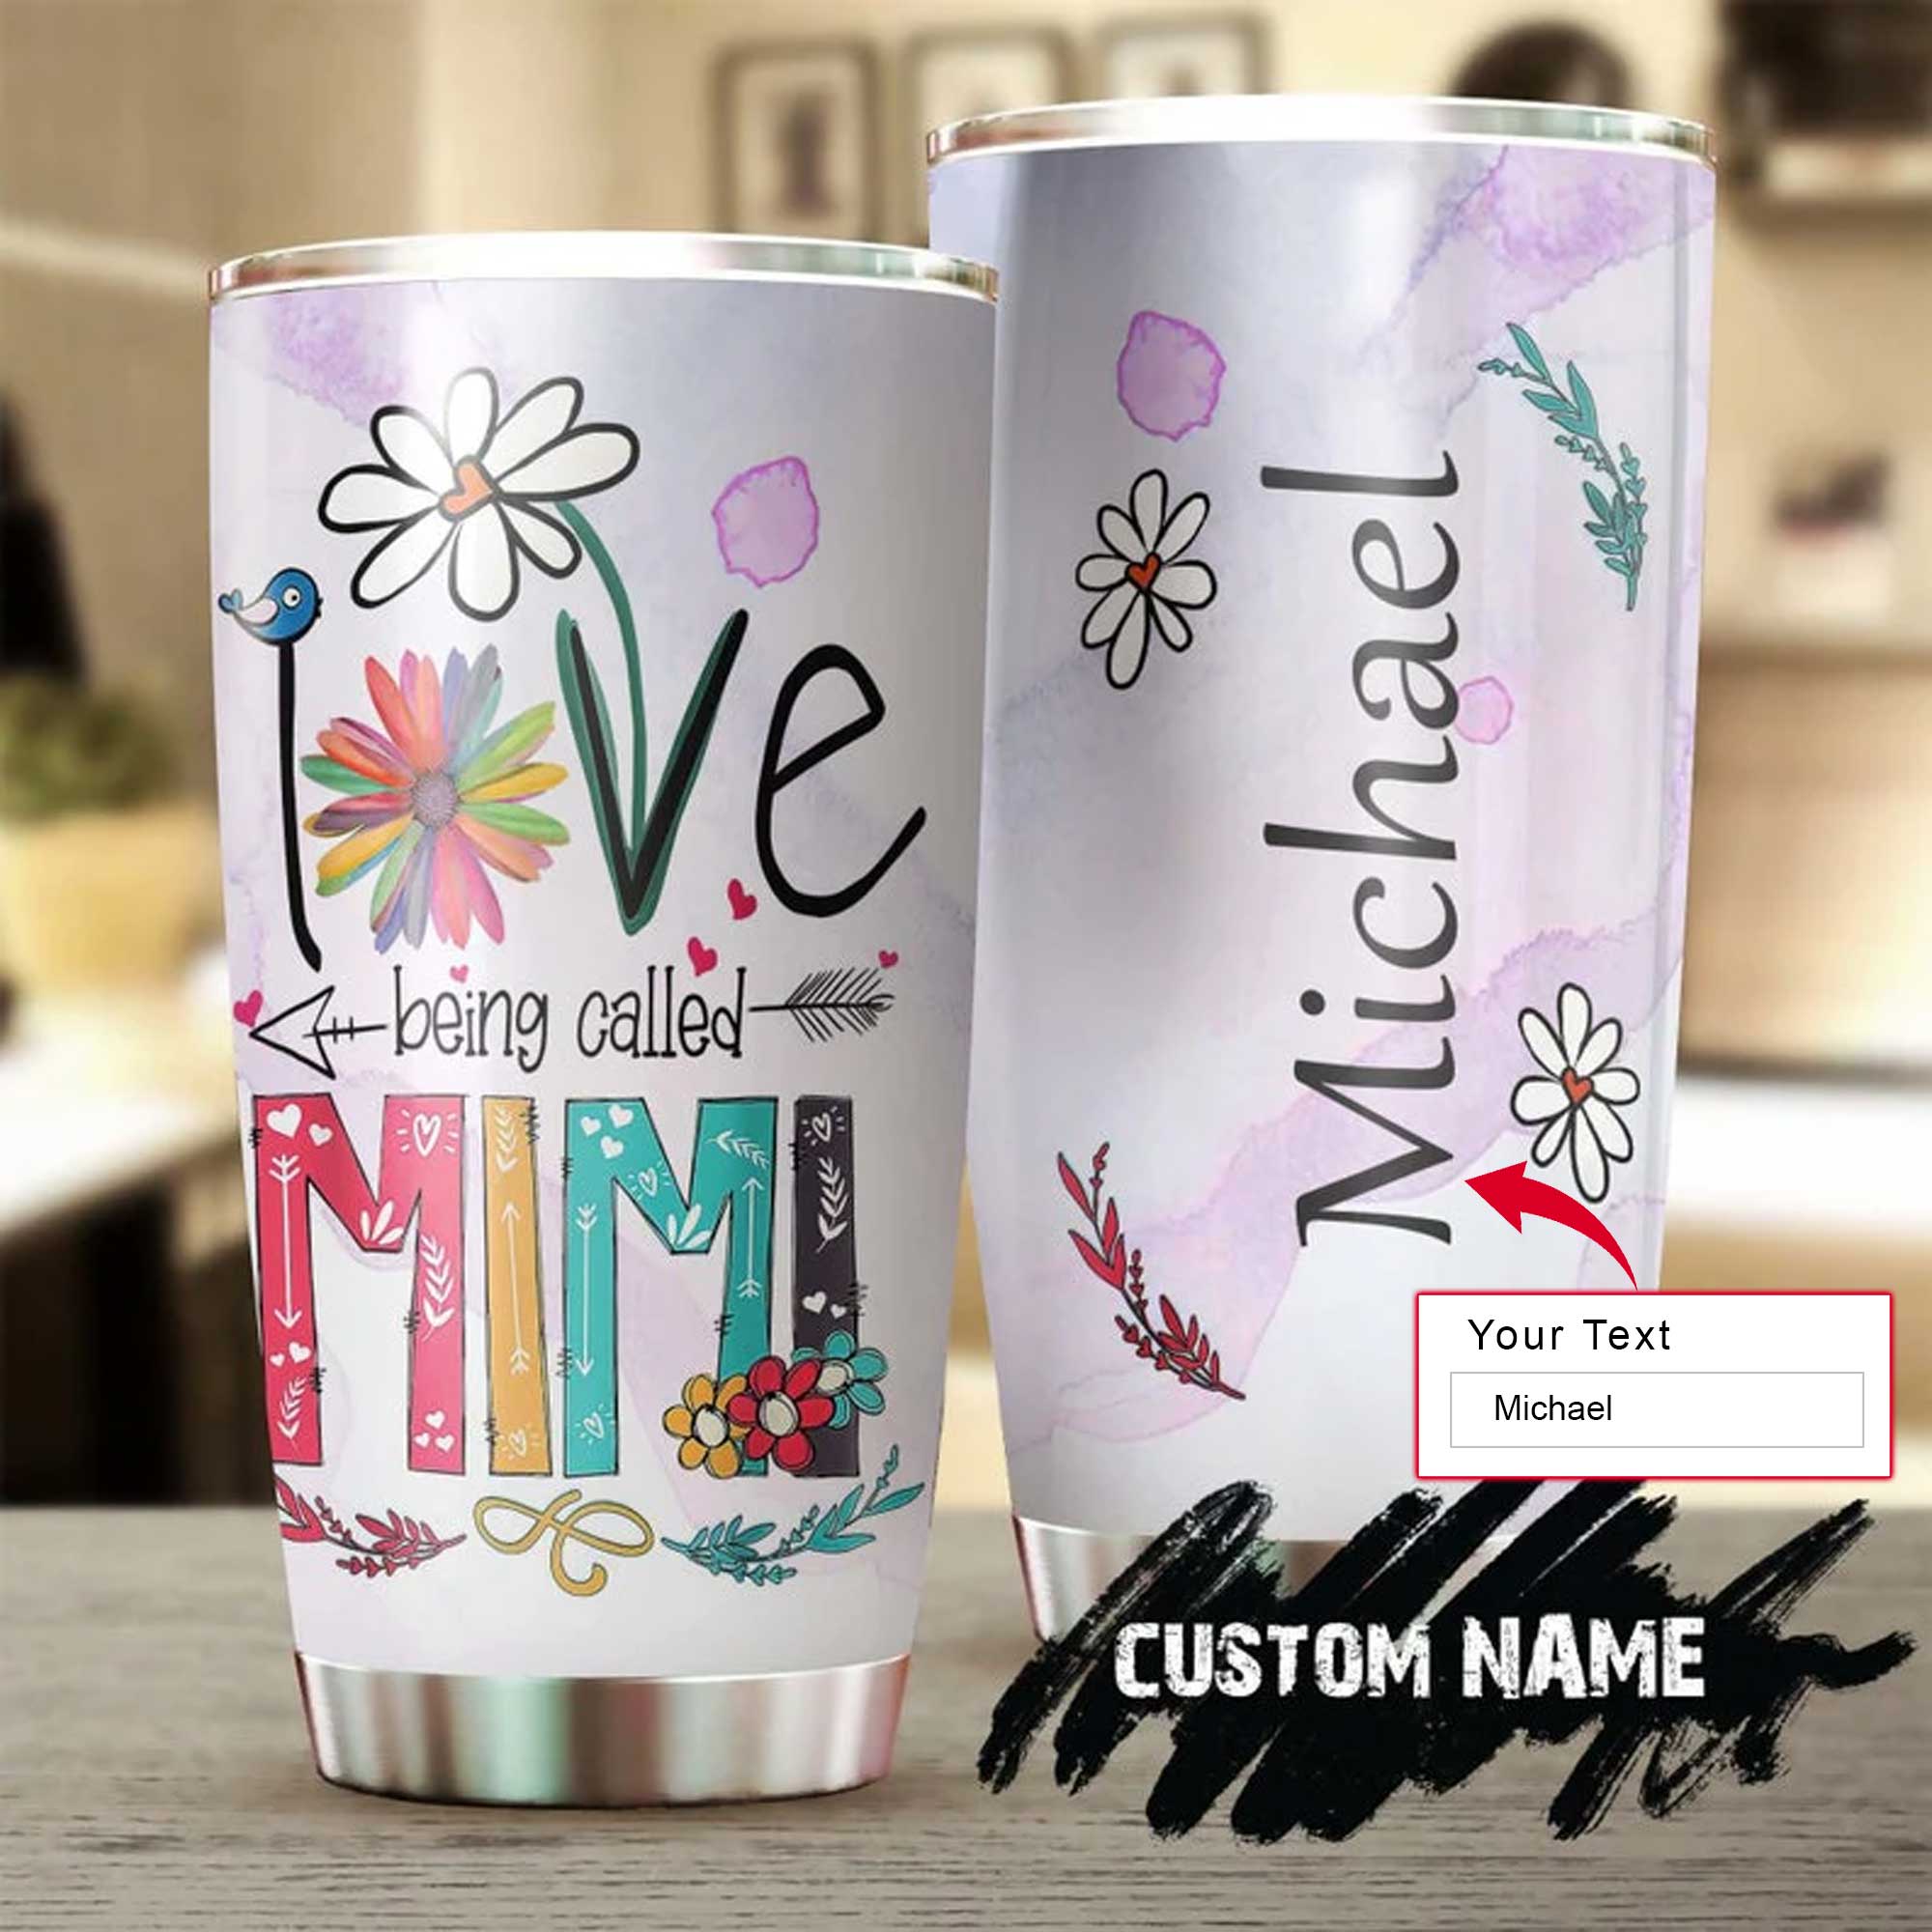 Personalized Mother's Day Gift Tumbler - Custom Gift For Mother's Day, Presents for Mom - Mom Mimi Love Being Called Mimi Tumbler